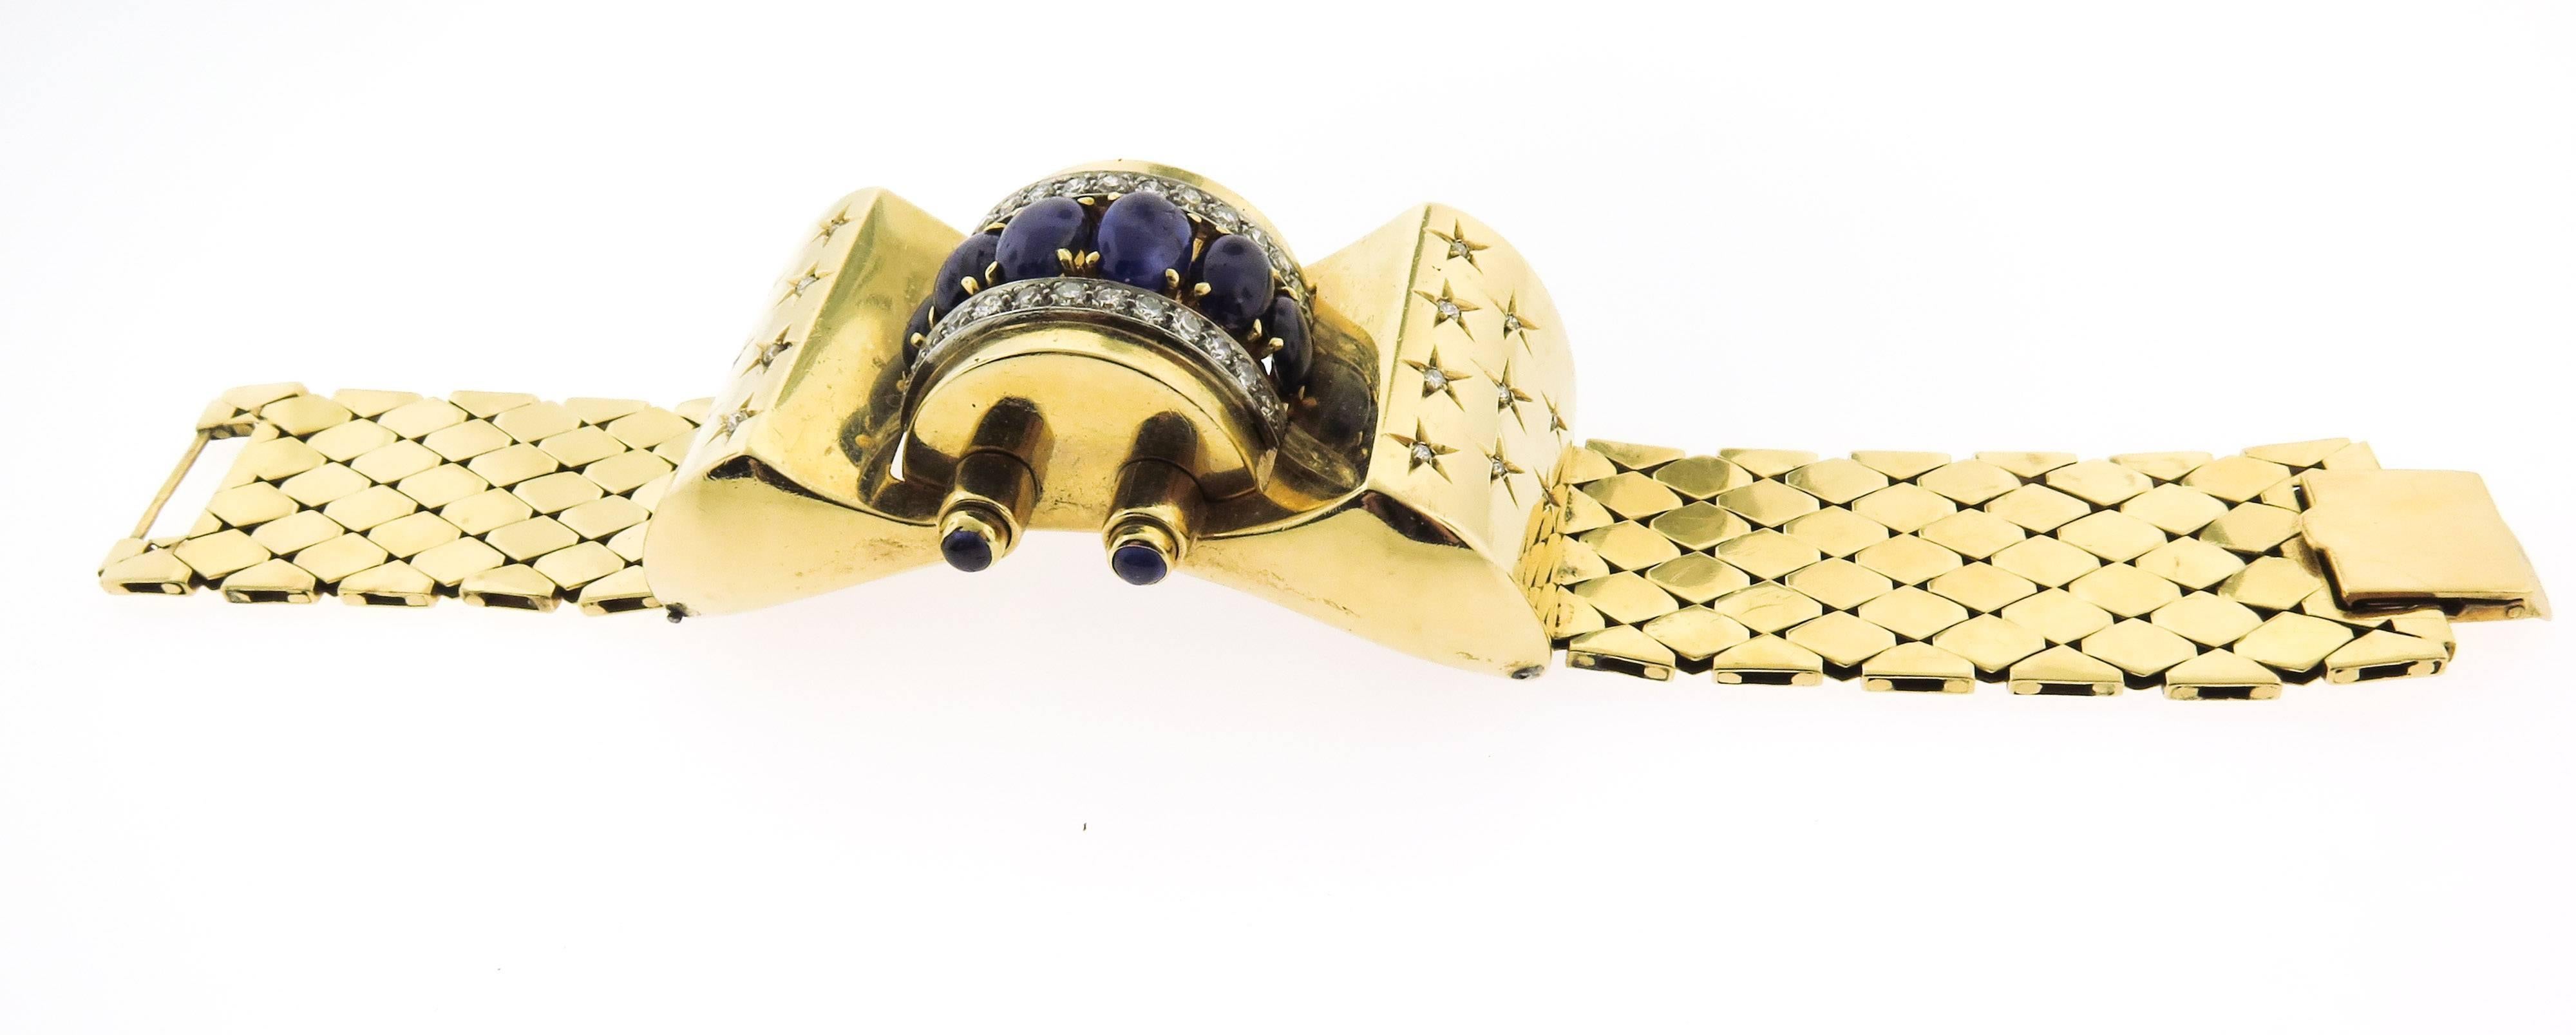 This exceptional and impressive vintage sapphire and diamond bracelet has been crafted in 18k yellow gold. This typical Art Deco design consists of two mesh and three center links accented with seven oval cabochon sapphires between two rows of